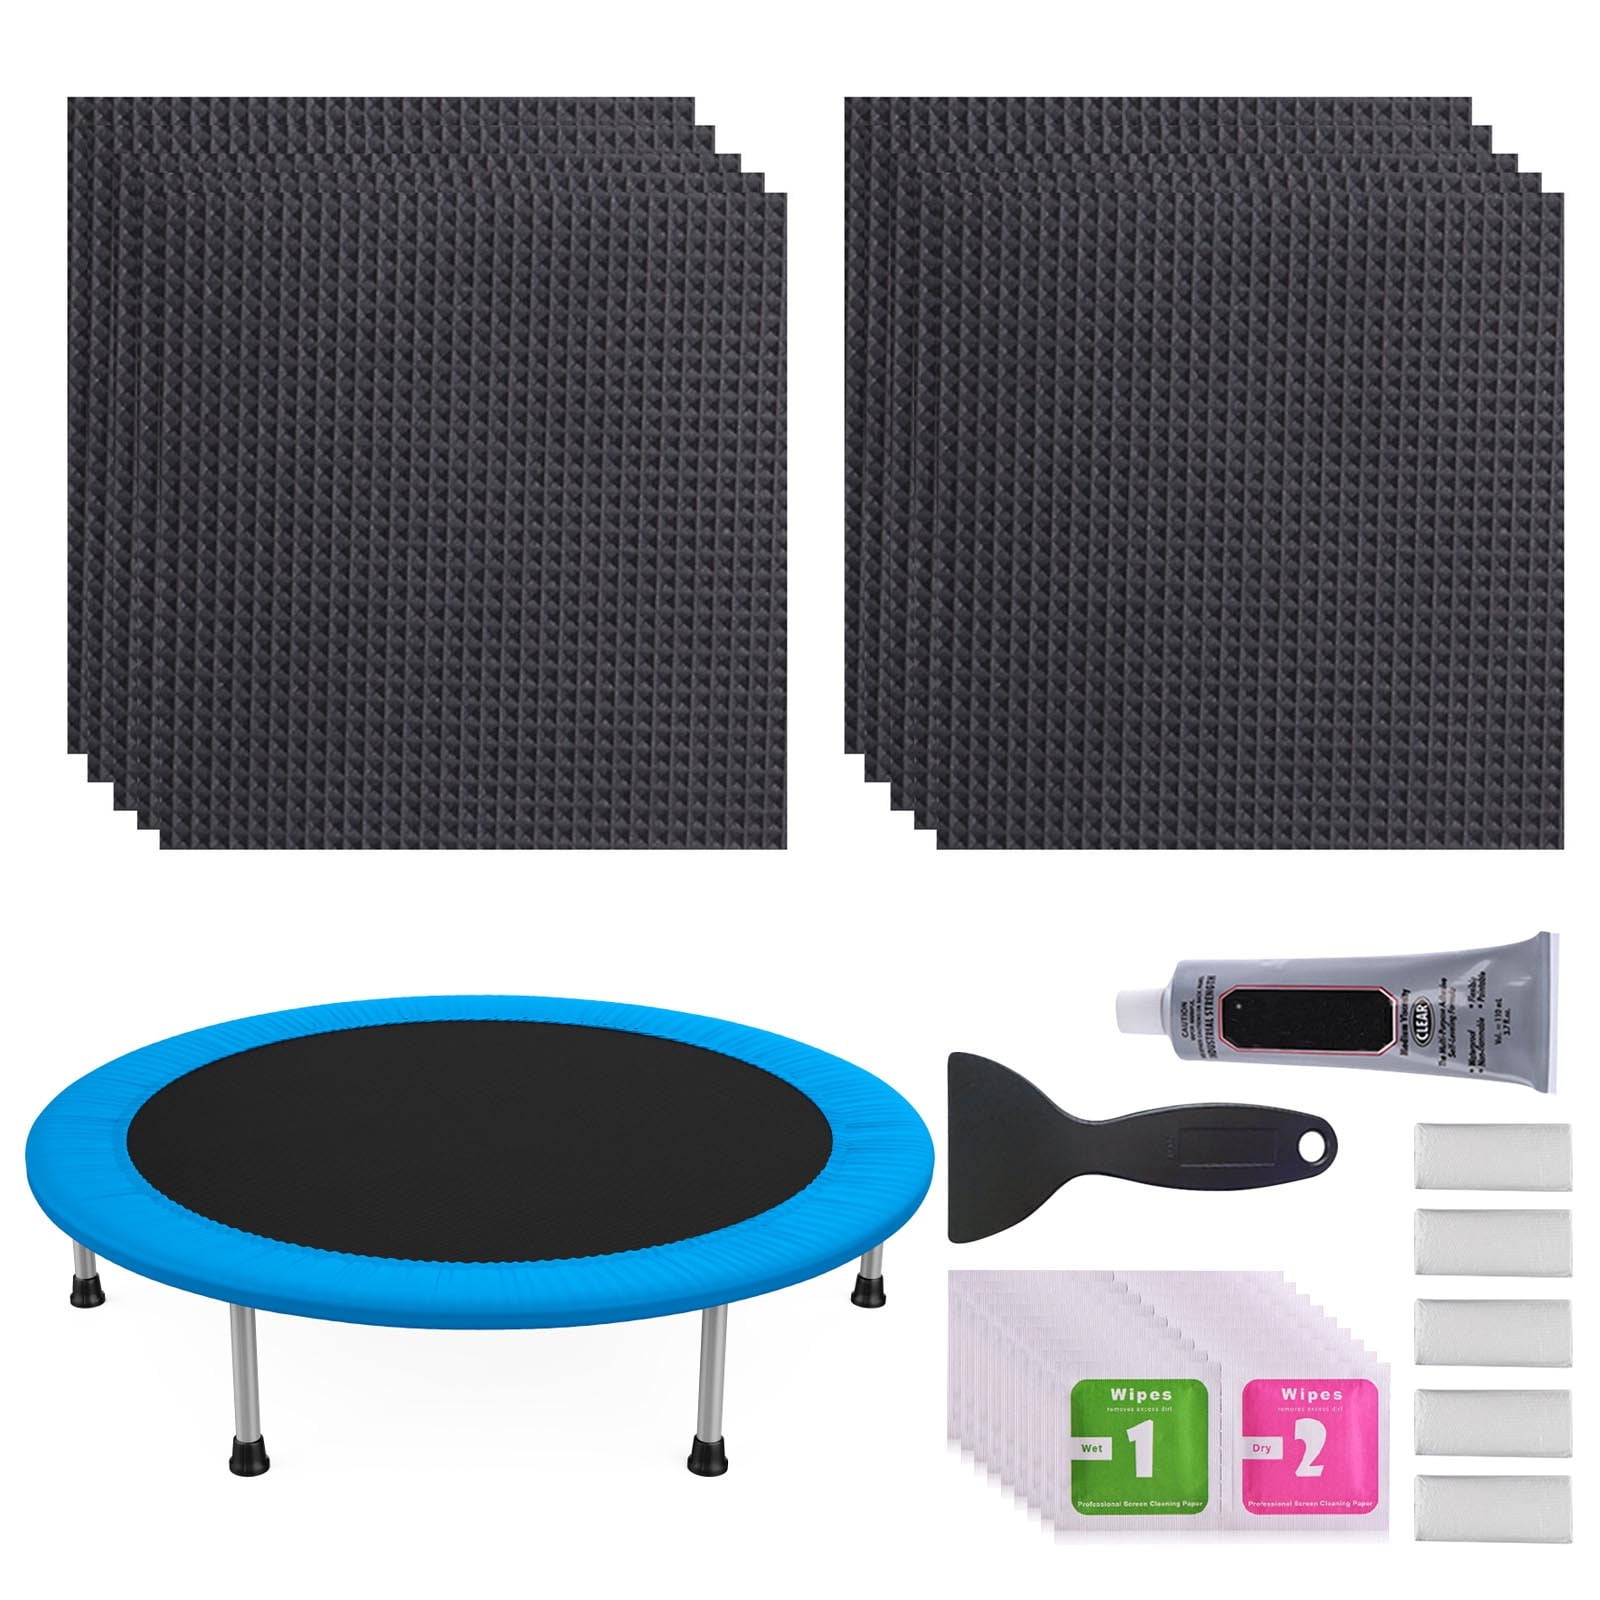 Fovolat 15pcs Trampoline Patch Repair Kit 4 inch Square Glue on Patches  Inflatable Pool and Bed Accessories Repair Trampoline Mat Tears or Holes15  pieces innate 